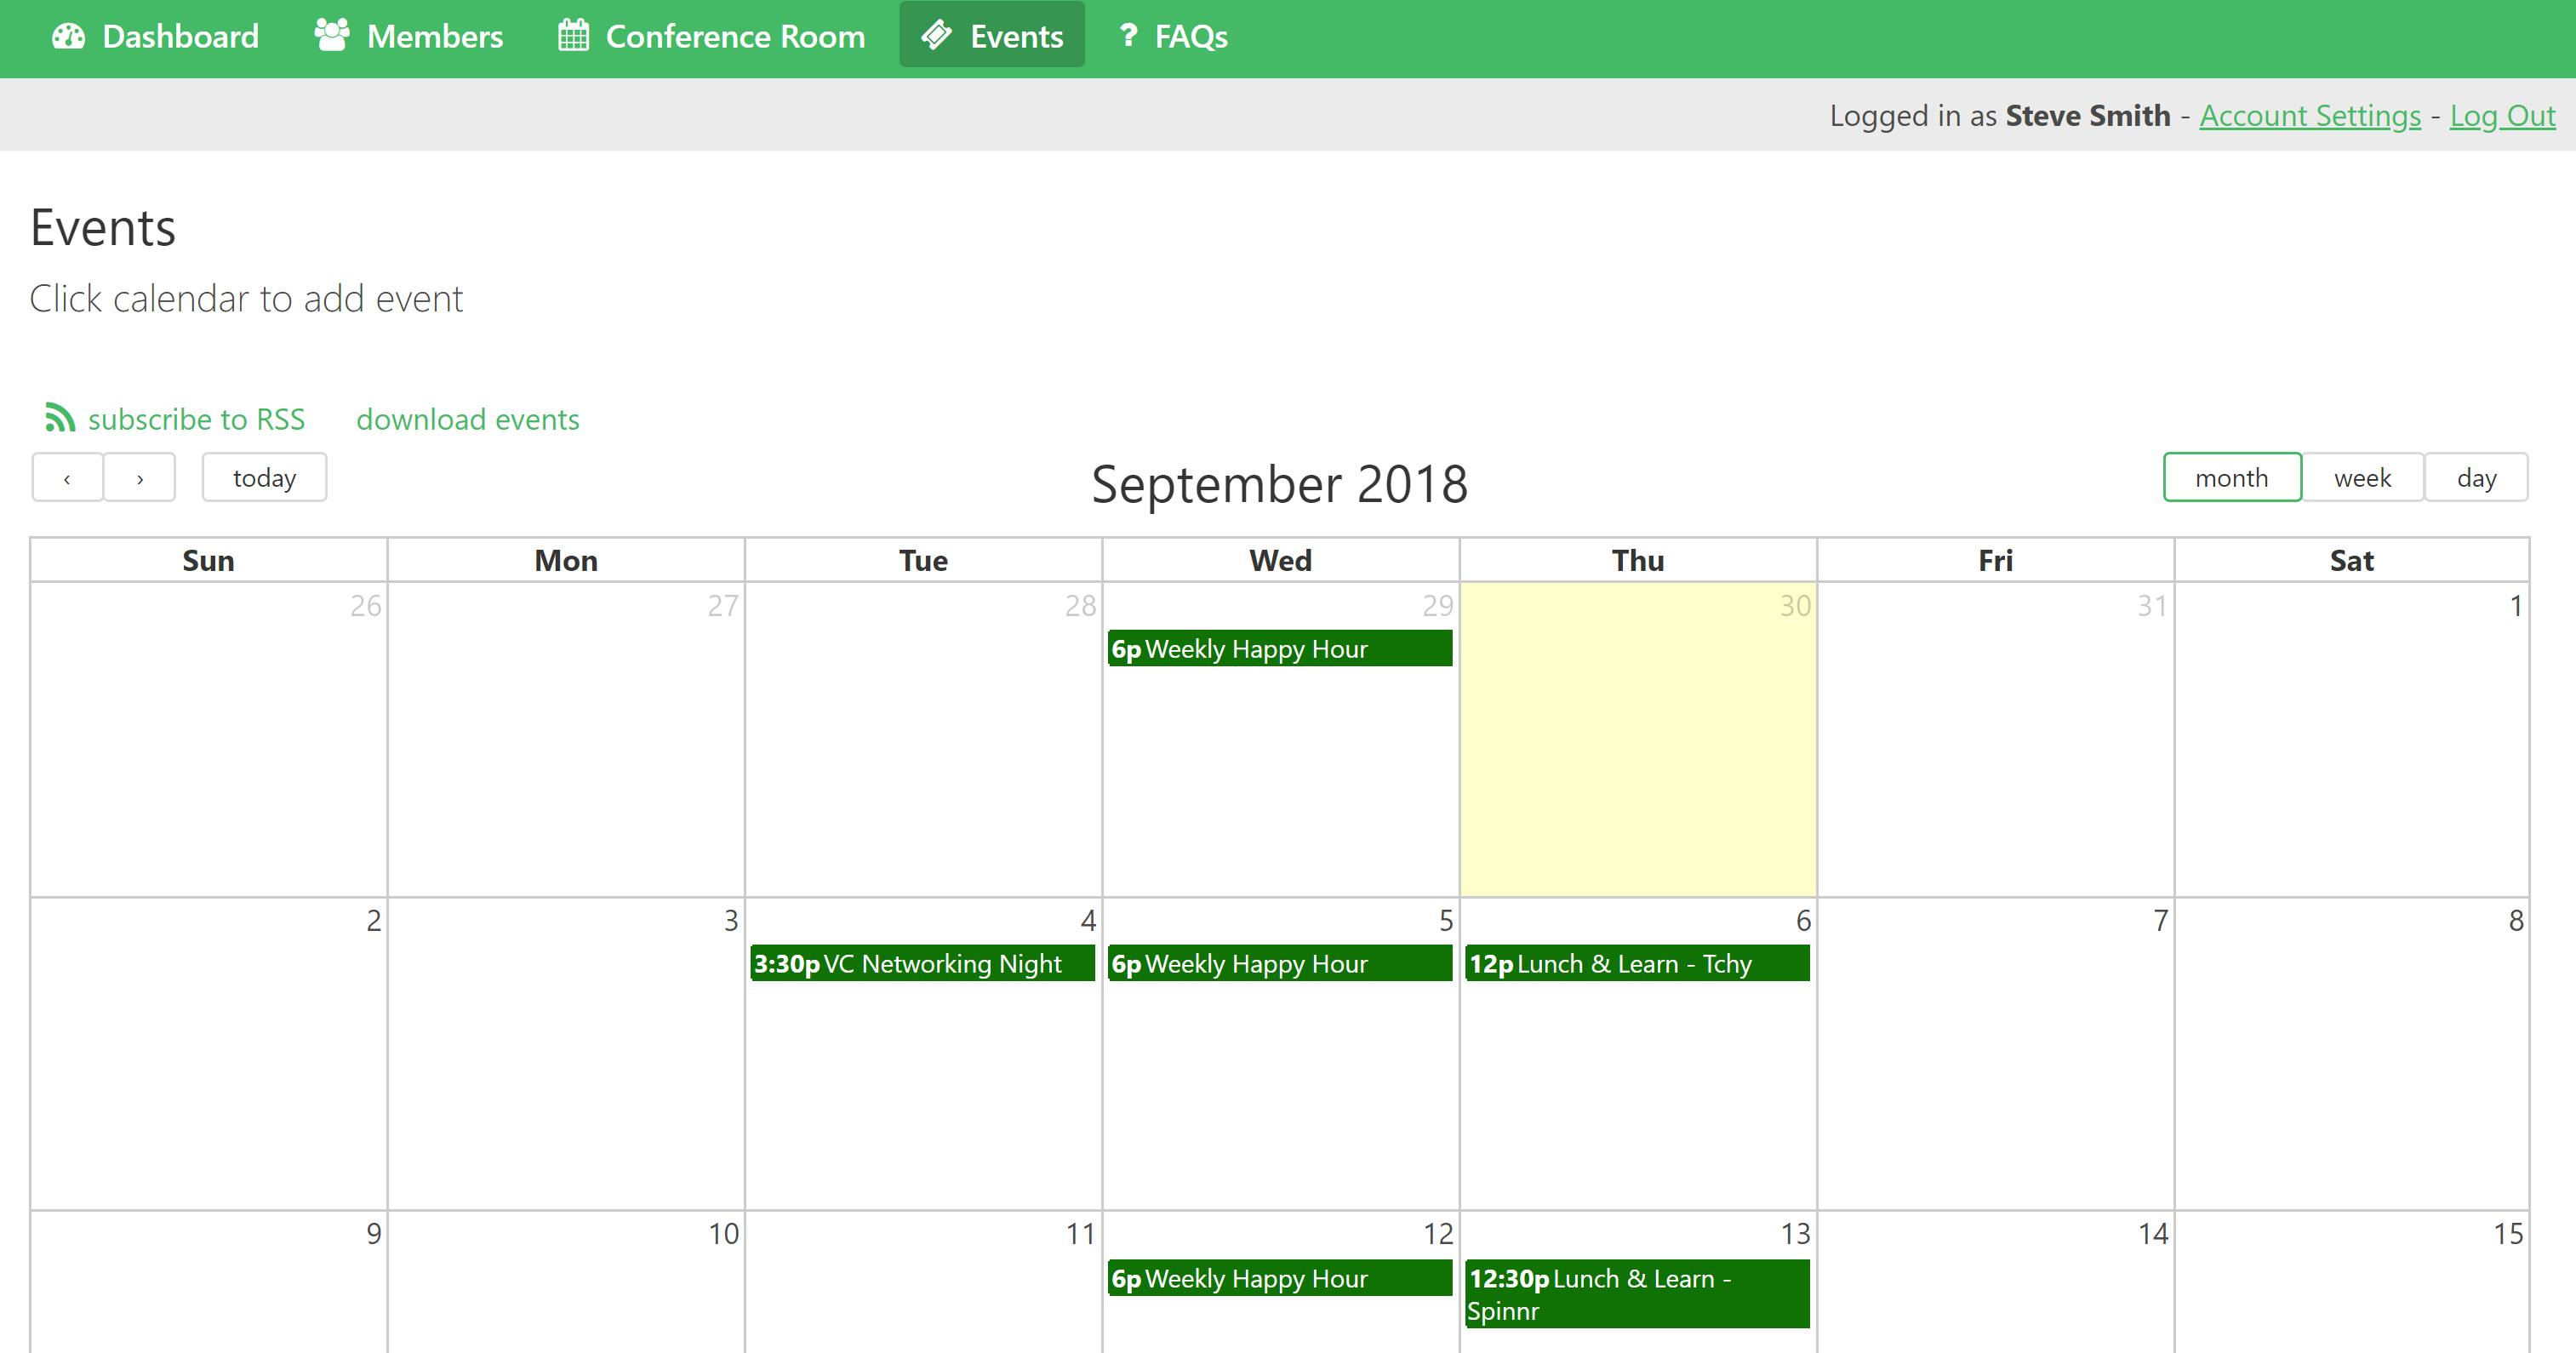 A calendar view makes it easy for members to see upcoming events. They can click on the calendar to add their own event.